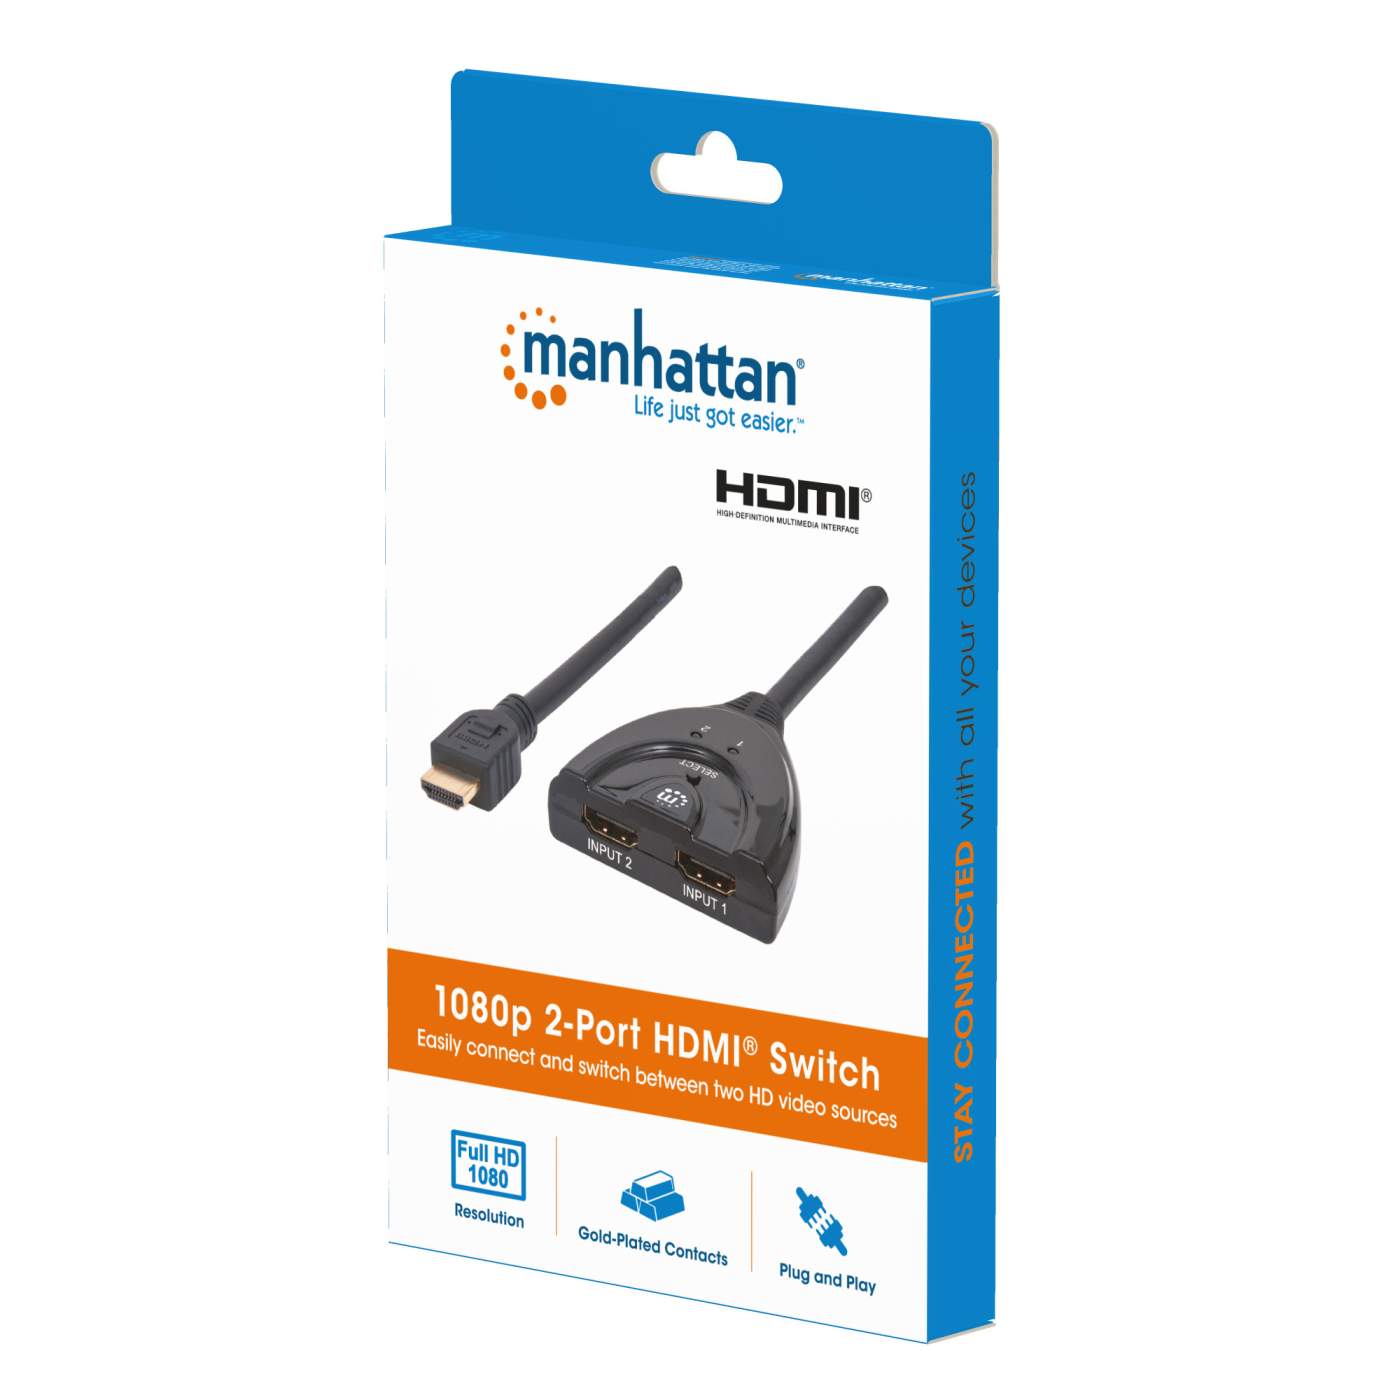 1080p 2-Port HDMI Switch Packaging Image 2